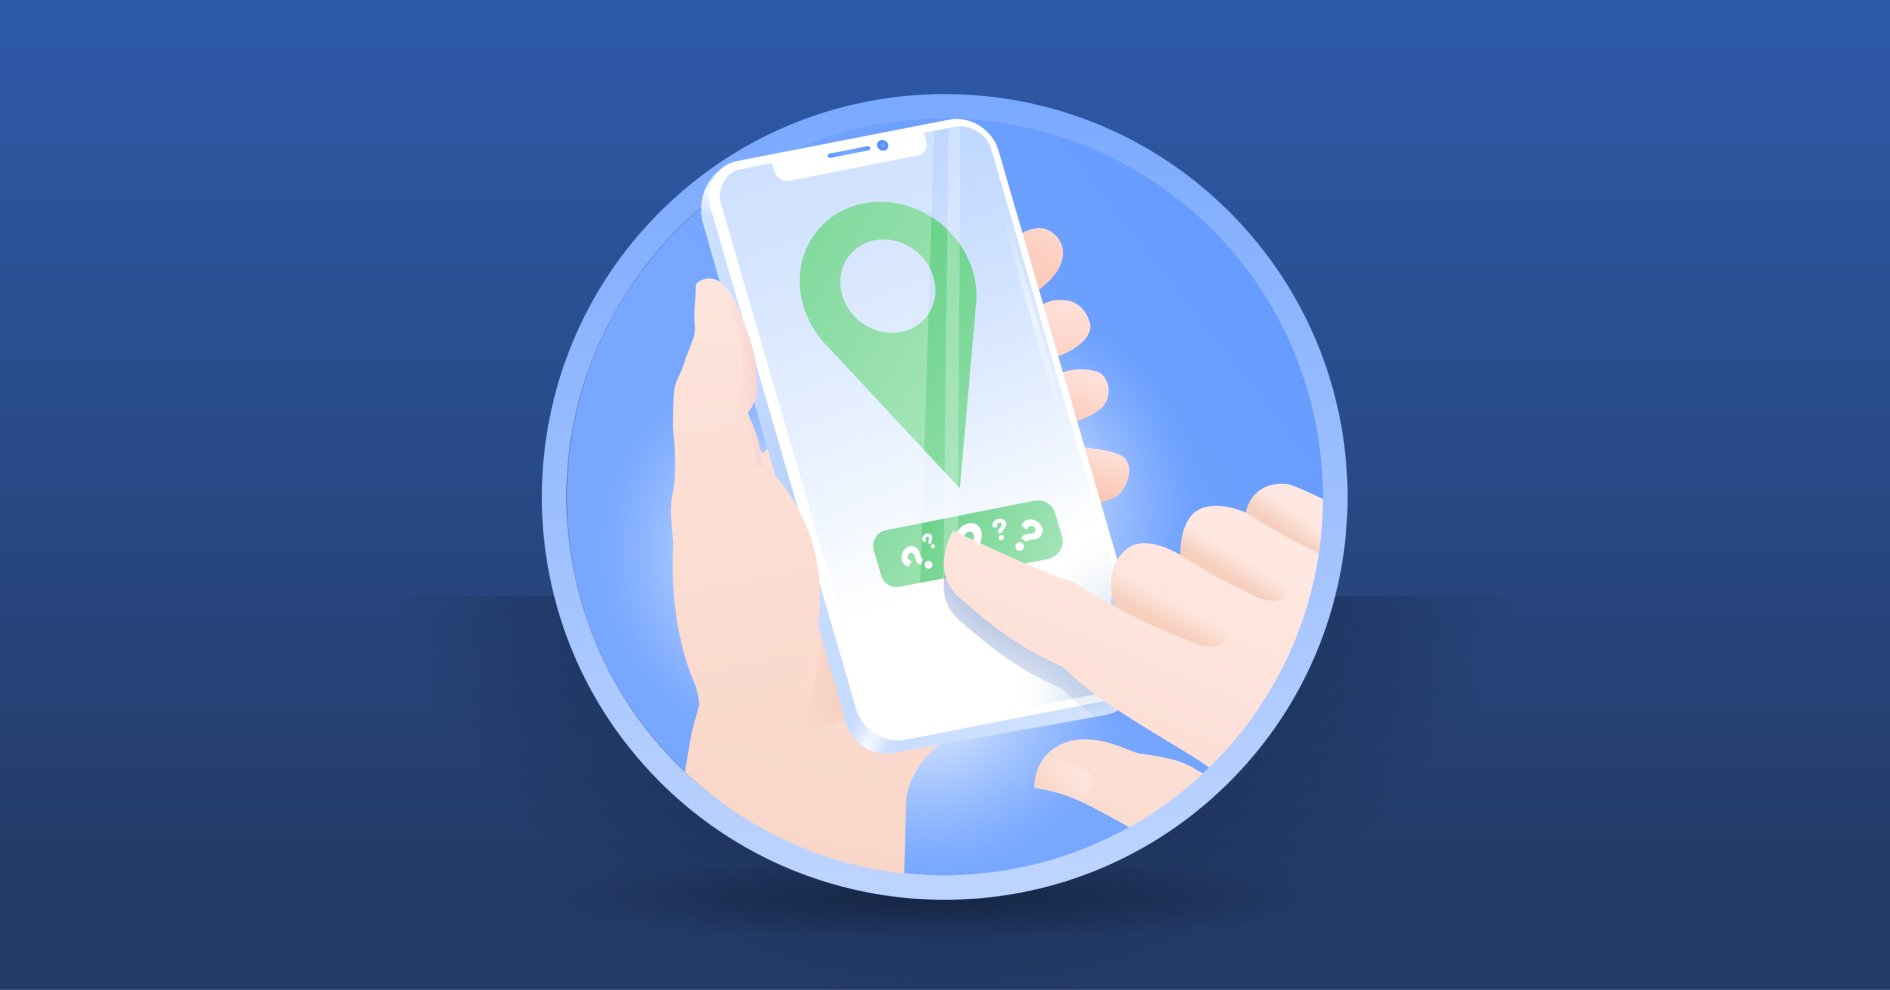 Best alternatives to Google Maps that focus on privacy